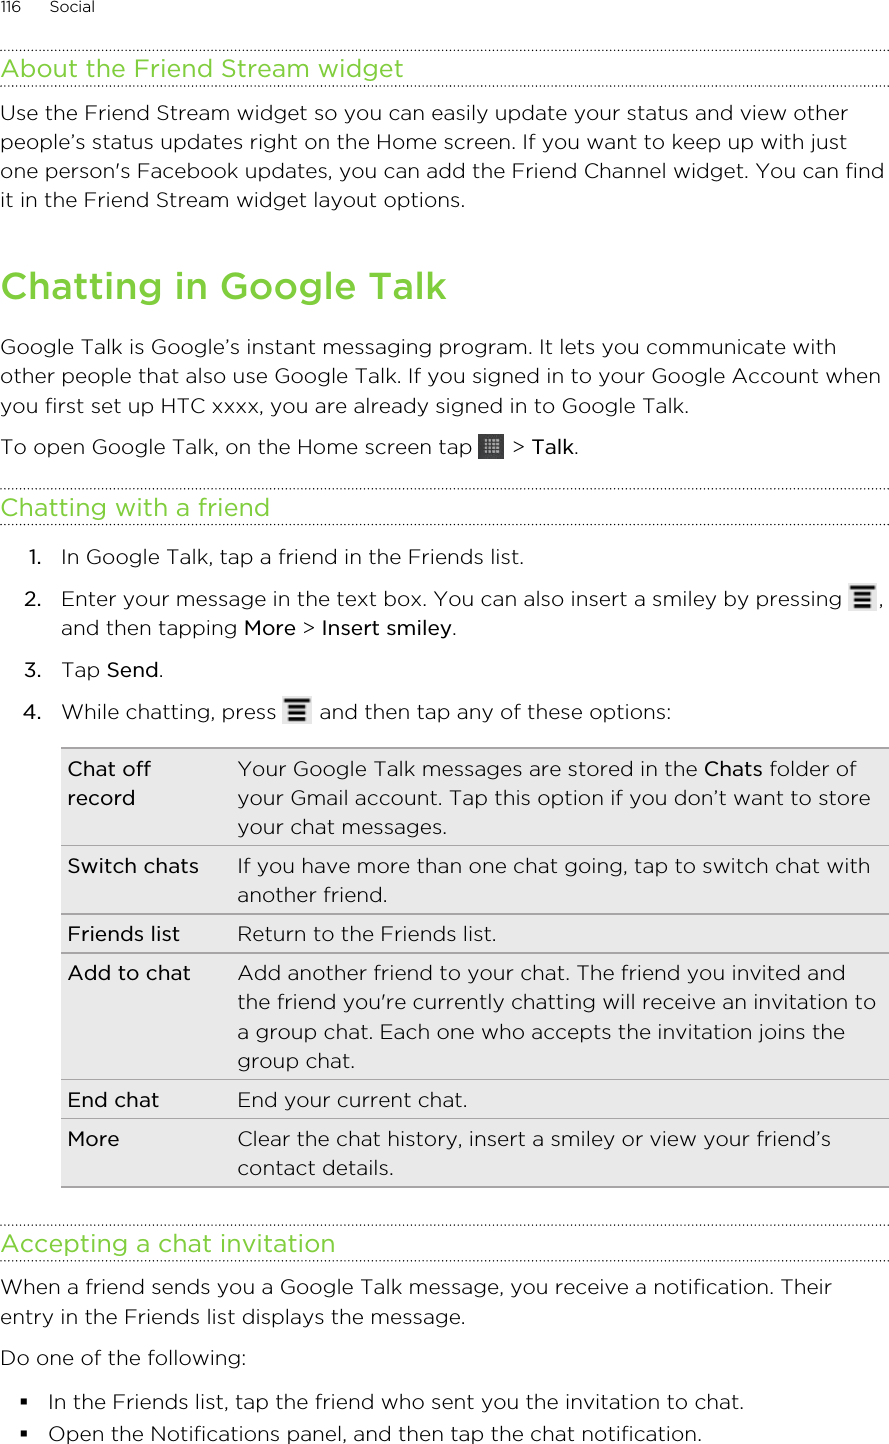 About the Friend Stream widgetUse the Friend Stream widget so you can easily update your status and view otherpeople’s status updates right on the Home screen. If you want to keep up with justone person&apos;s Facebook updates, you can add the Friend Channel widget. You can findit in the Friend Stream widget layout options.Chatting in Google TalkGoogle Talk is Google’s instant messaging program. It lets you communicate withother people that also use Google Talk. If you signed in to your Google Account whenyou first set up HTC xxxx, you are already signed in to Google Talk.To open Google Talk, on the Home screen tap   &gt; Talk.Chatting with a friend1. In Google Talk, tap a friend in the Friends list.2. Enter your message in the text box. You can also insert a smiley by pressing  ,and then tapping More &gt; Insert smiley.3. Tap Send.4. While chatting, press   and then tap any of these options:Chat offrecordYour Google Talk messages are stored in the Chats folder ofyour Gmail account. Tap this option if you don’t want to storeyour chat messages.Switch chats If you have more than one chat going, tap to switch chat withanother friend.Friends list Return to the Friends list.Add to chat Add another friend to your chat. The friend you invited andthe friend you&apos;re currently chatting will receive an invitation toa group chat. Each one who accepts the invitation joins thegroup chat.End chat End your current chat.More Clear the chat history, insert a smiley or view your friend’scontact details.Accepting a chat invitationWhen a friend sends you a Google Talk message, you receive a notification. Theirentry in the Friends list displays the message.Do one of the following:§In the Friends list, tap the friend who sent you the invitation to chat.§Open the Notifications panel, and then tap the chat notification.116 Social